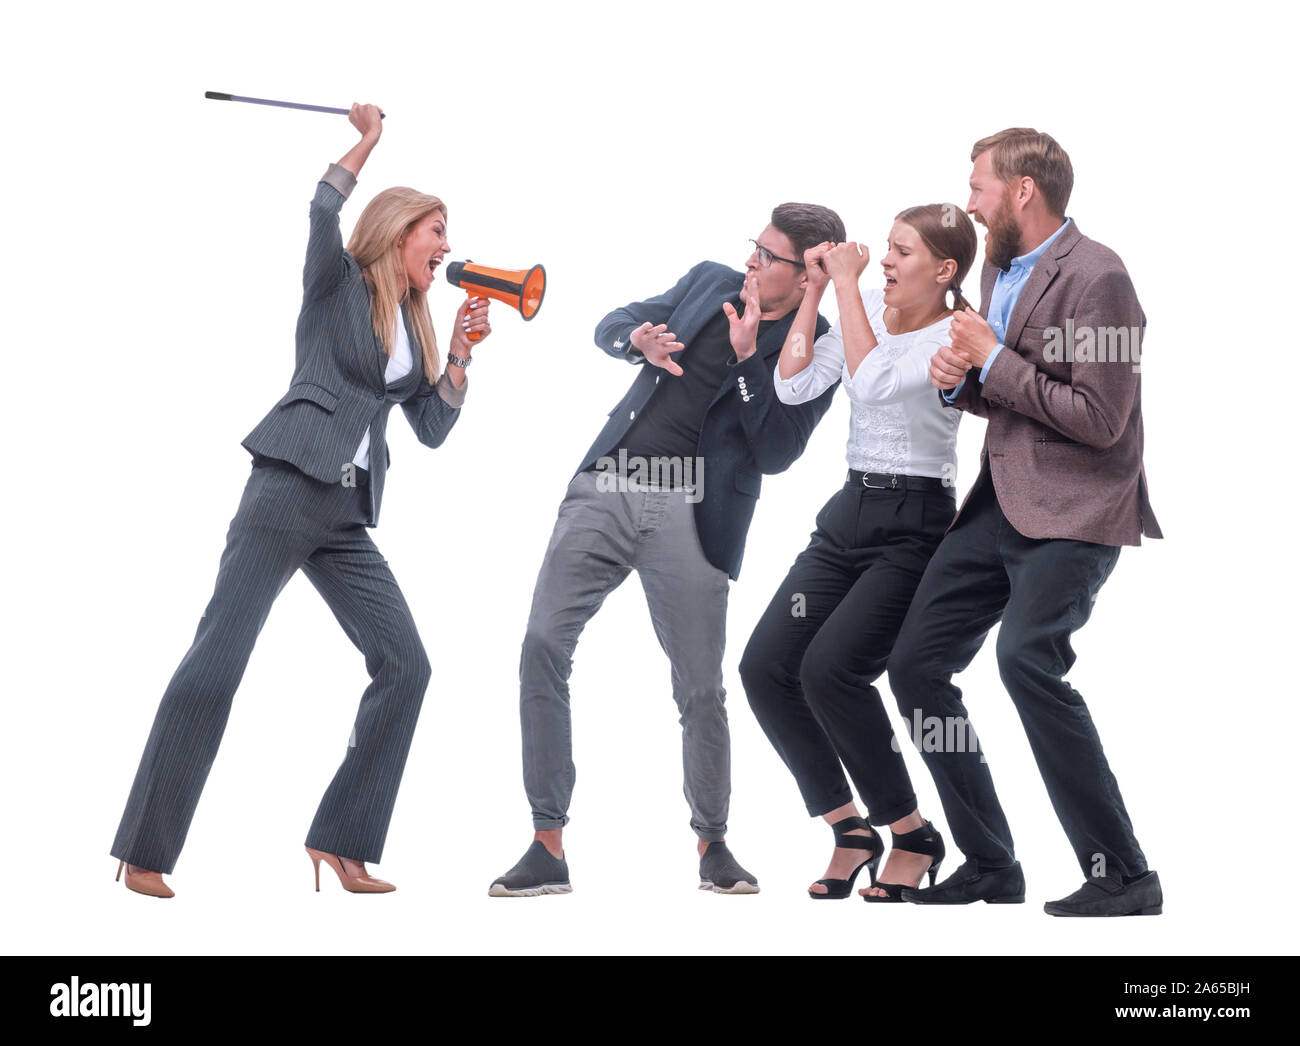 irritated businesswoman shouts loudly at her subordinates. Stock Photo